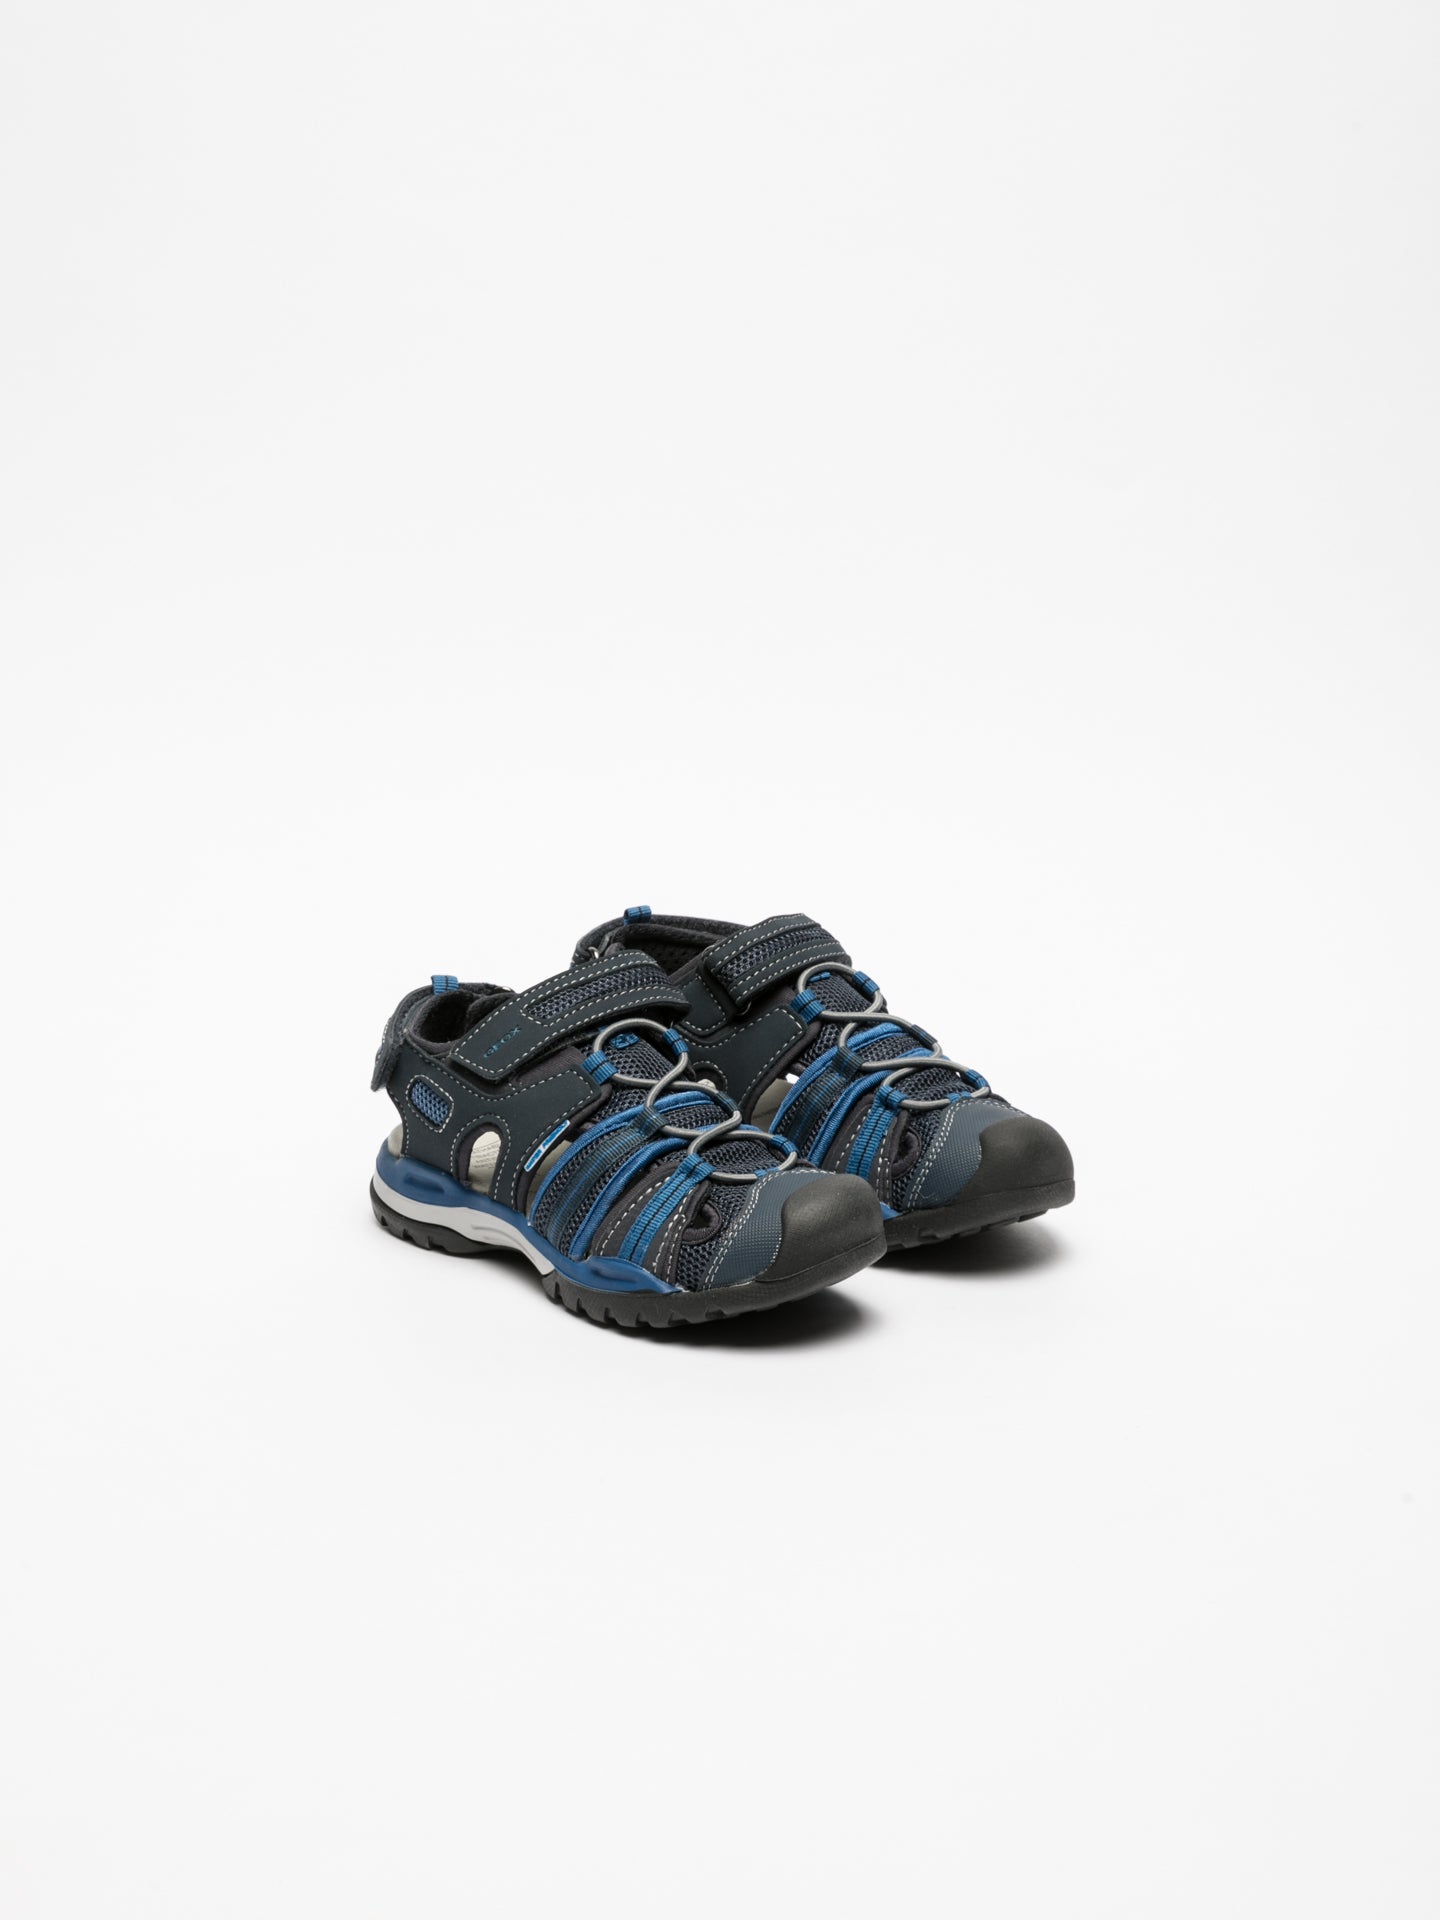 Geox Blue Buckle Sandals